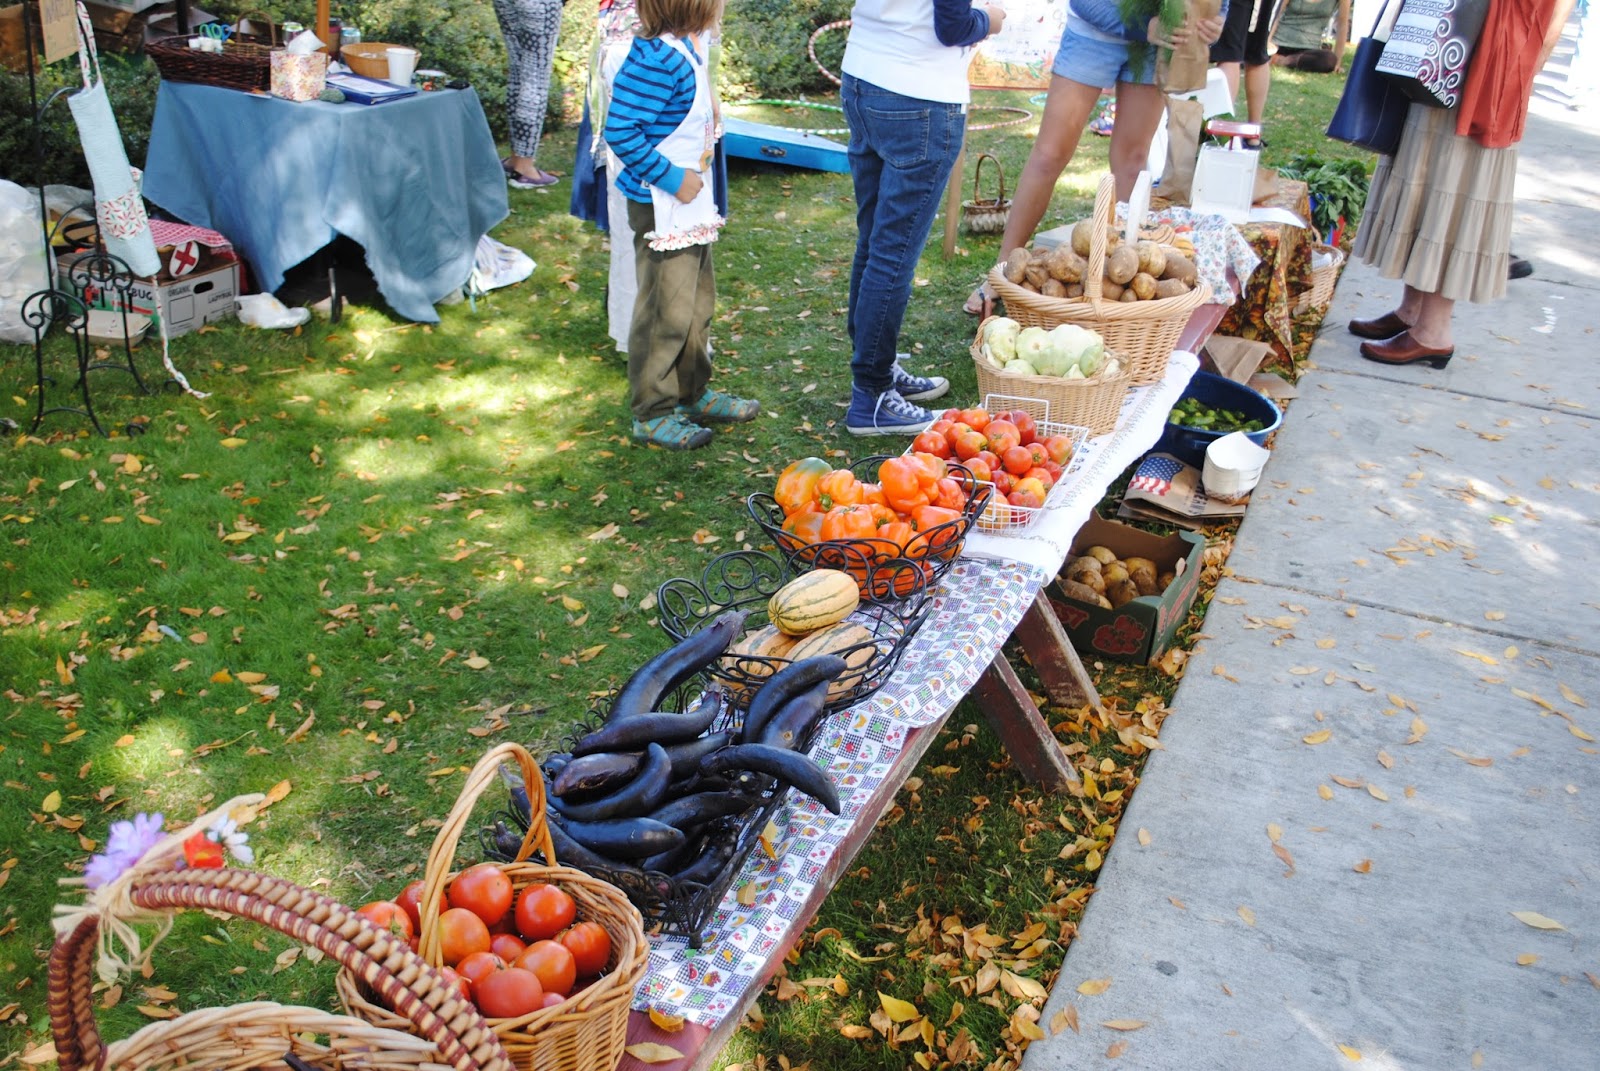 TALENT HARVEST FESTIVAL  & RUN - What to do in Southern Oregon - Kids - Family - Fall